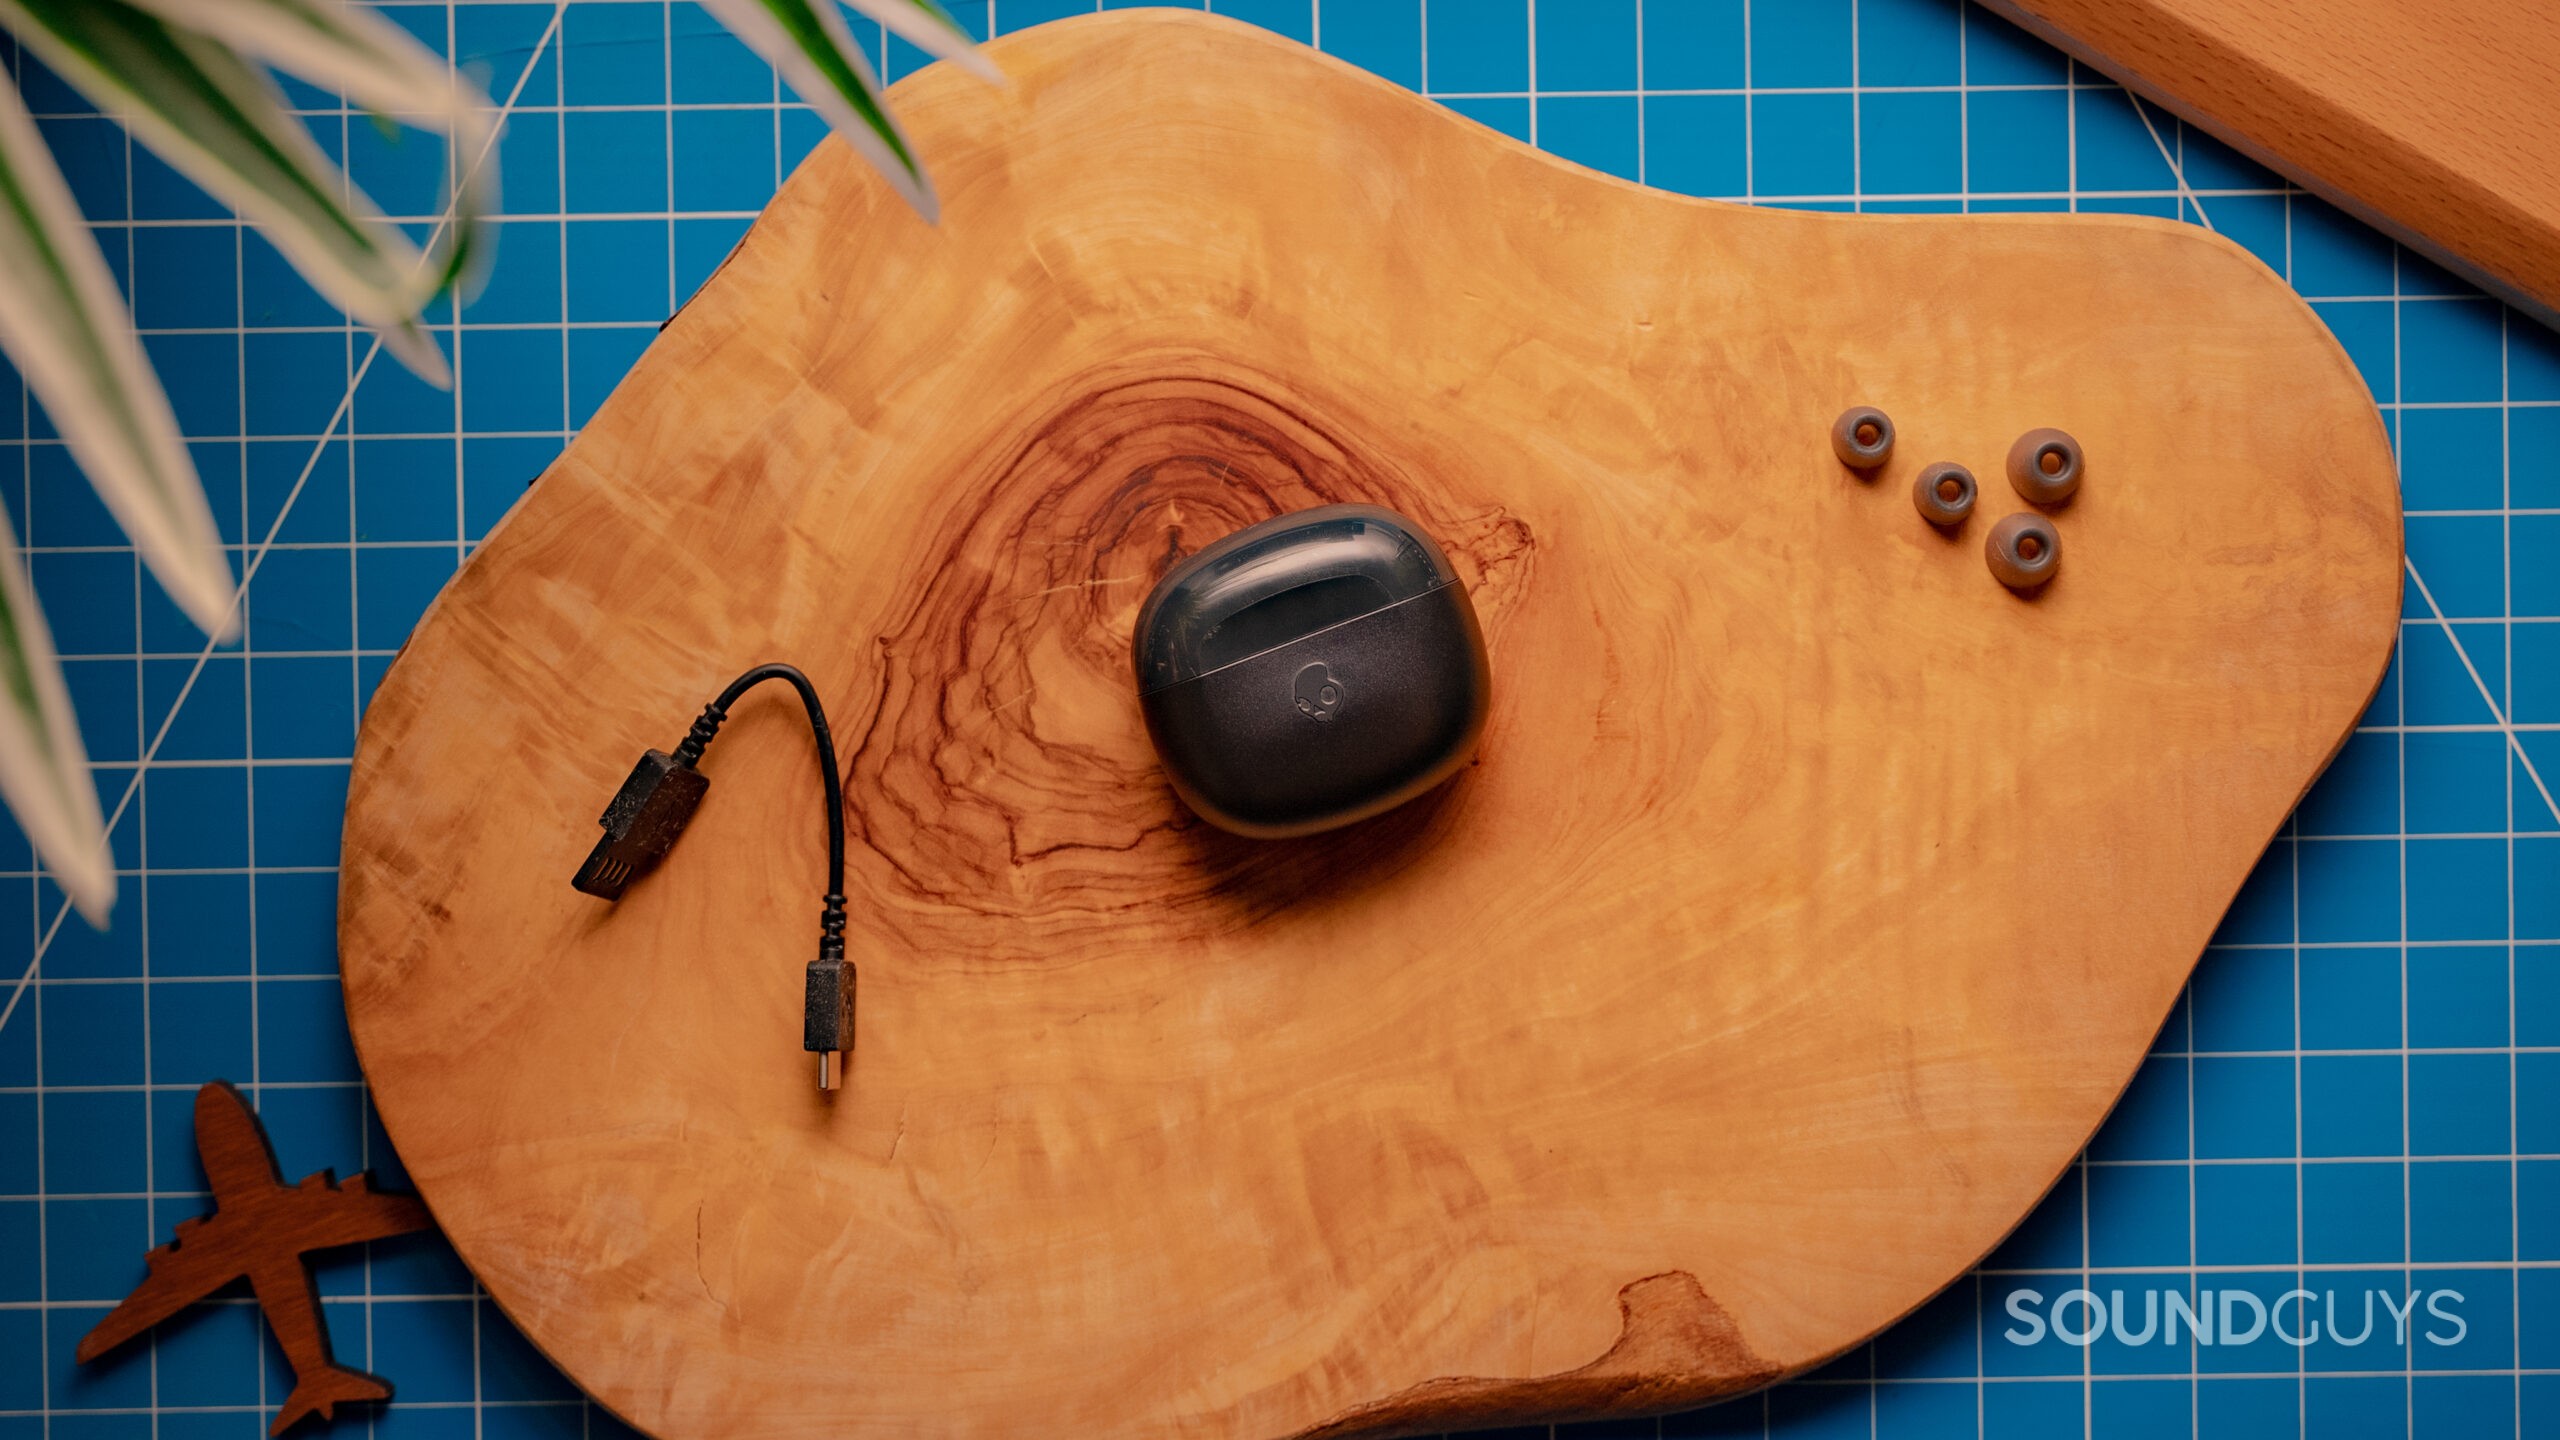 On a wood surface the closed case of the Skullcandy Rail ANC rests on its side with the charging cable and ear tips.